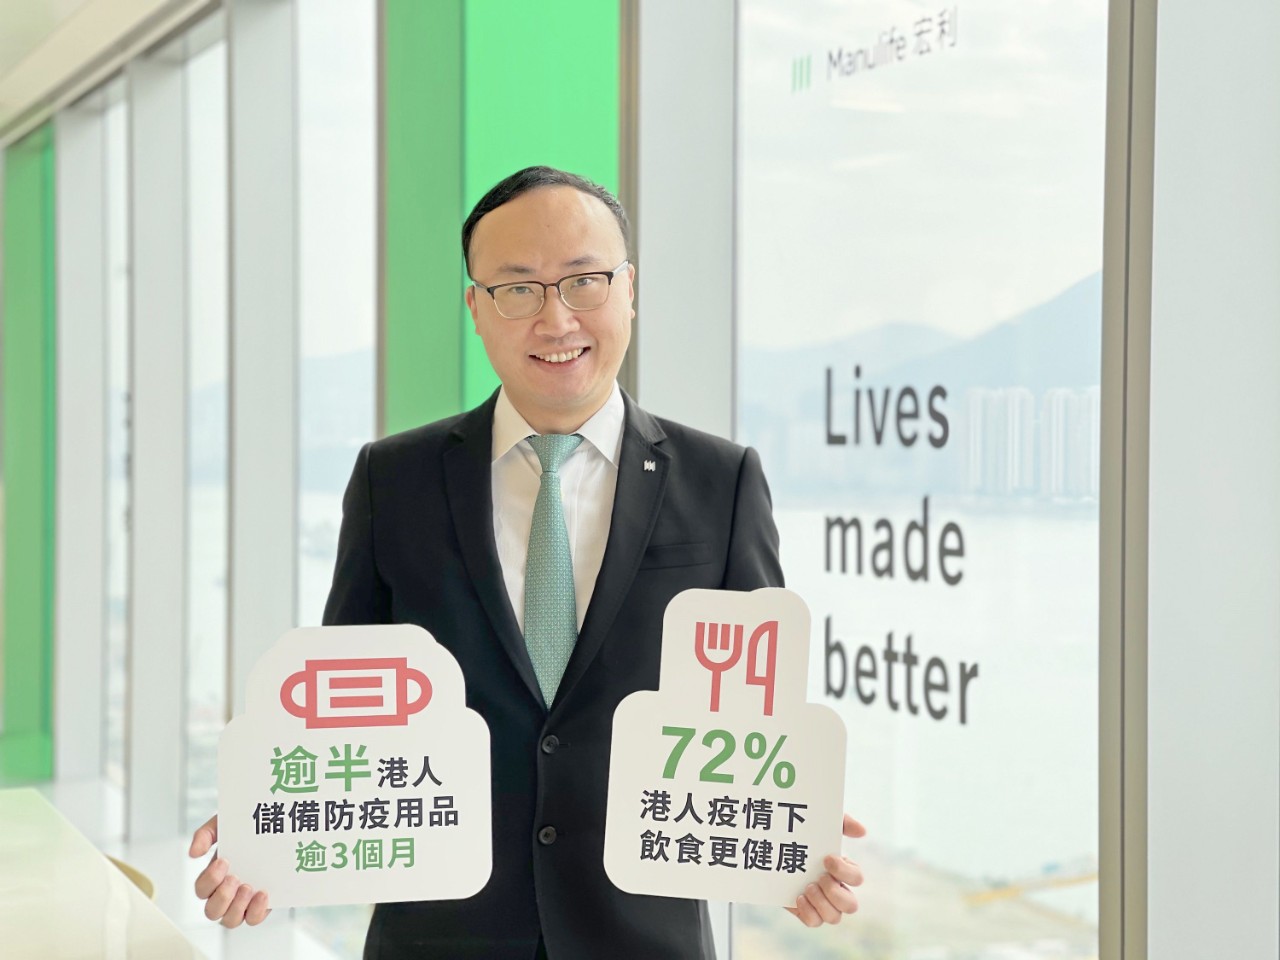 Manulife’s latest survey reveals that Hongkongers expect the COVID-19 pandemic to last and seek healthier habits to prepare for an extended presence of the virus, according to Wilton Kee, Vice President, Chief Product Officer and Head of Health at Manulife Hong Kong.